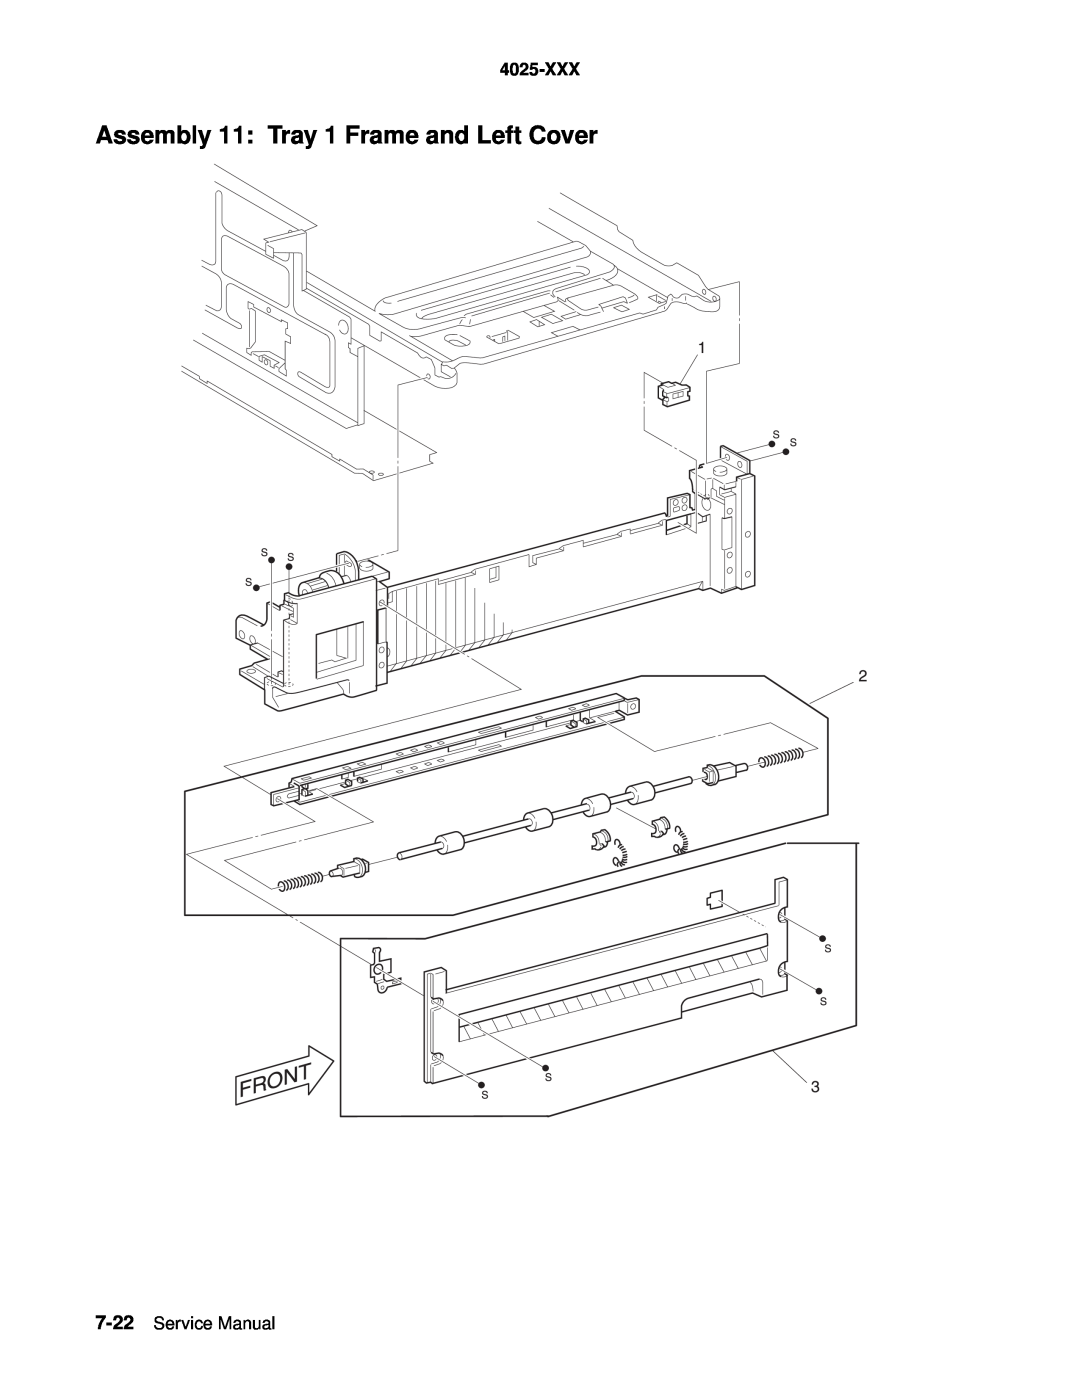 Lexmark W820 service manual Assembly 11 Tray 1 Frame and Left Cover, 4025-XXX, Service Manual 